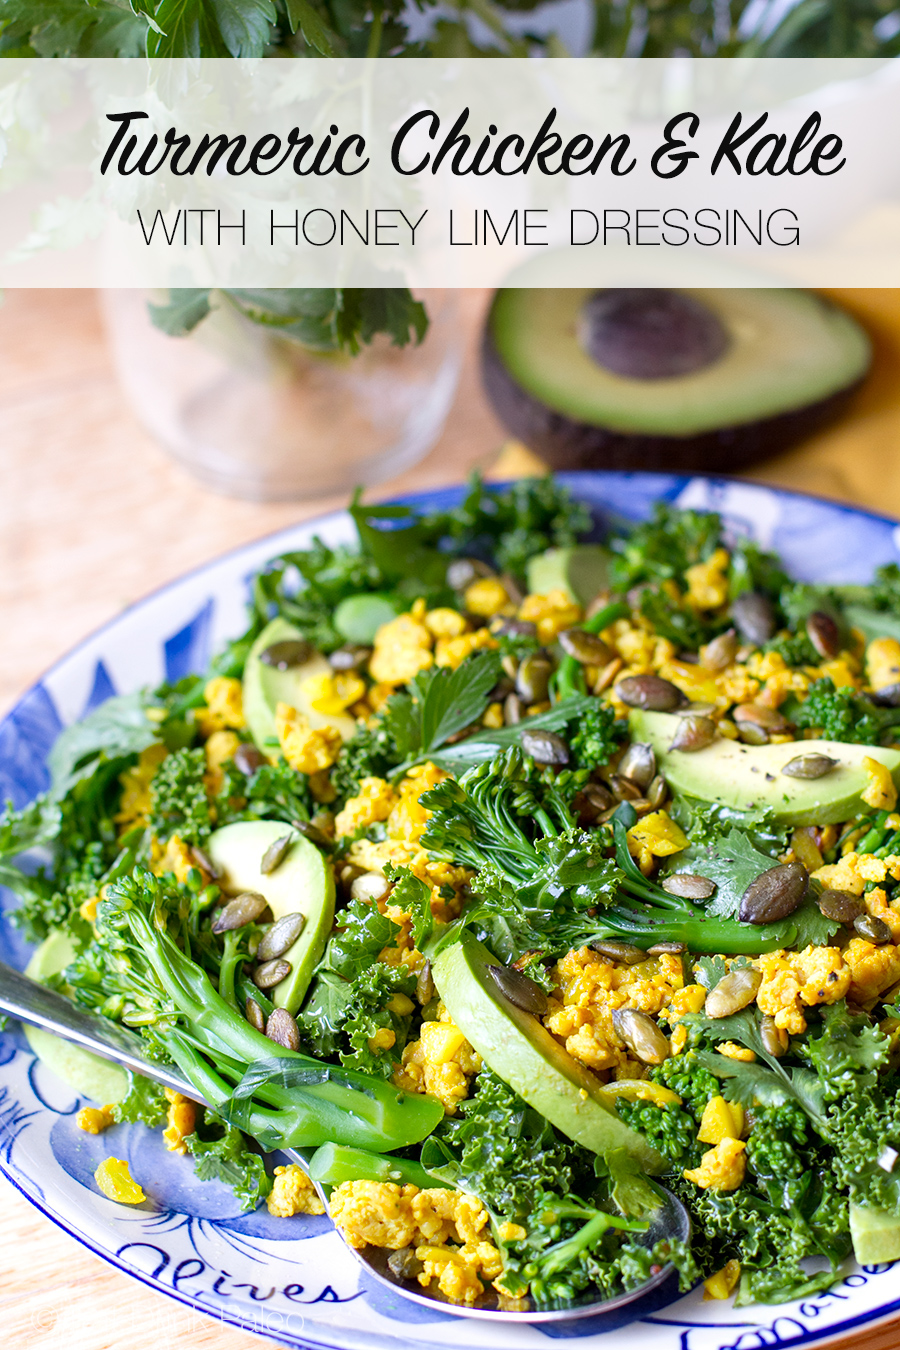 Turmeric Chicken & Kale Salad with Honey Lime Dressing - Paleo, Gluten Free, Low Carb, Whole30 and Clean Eating Friendly.